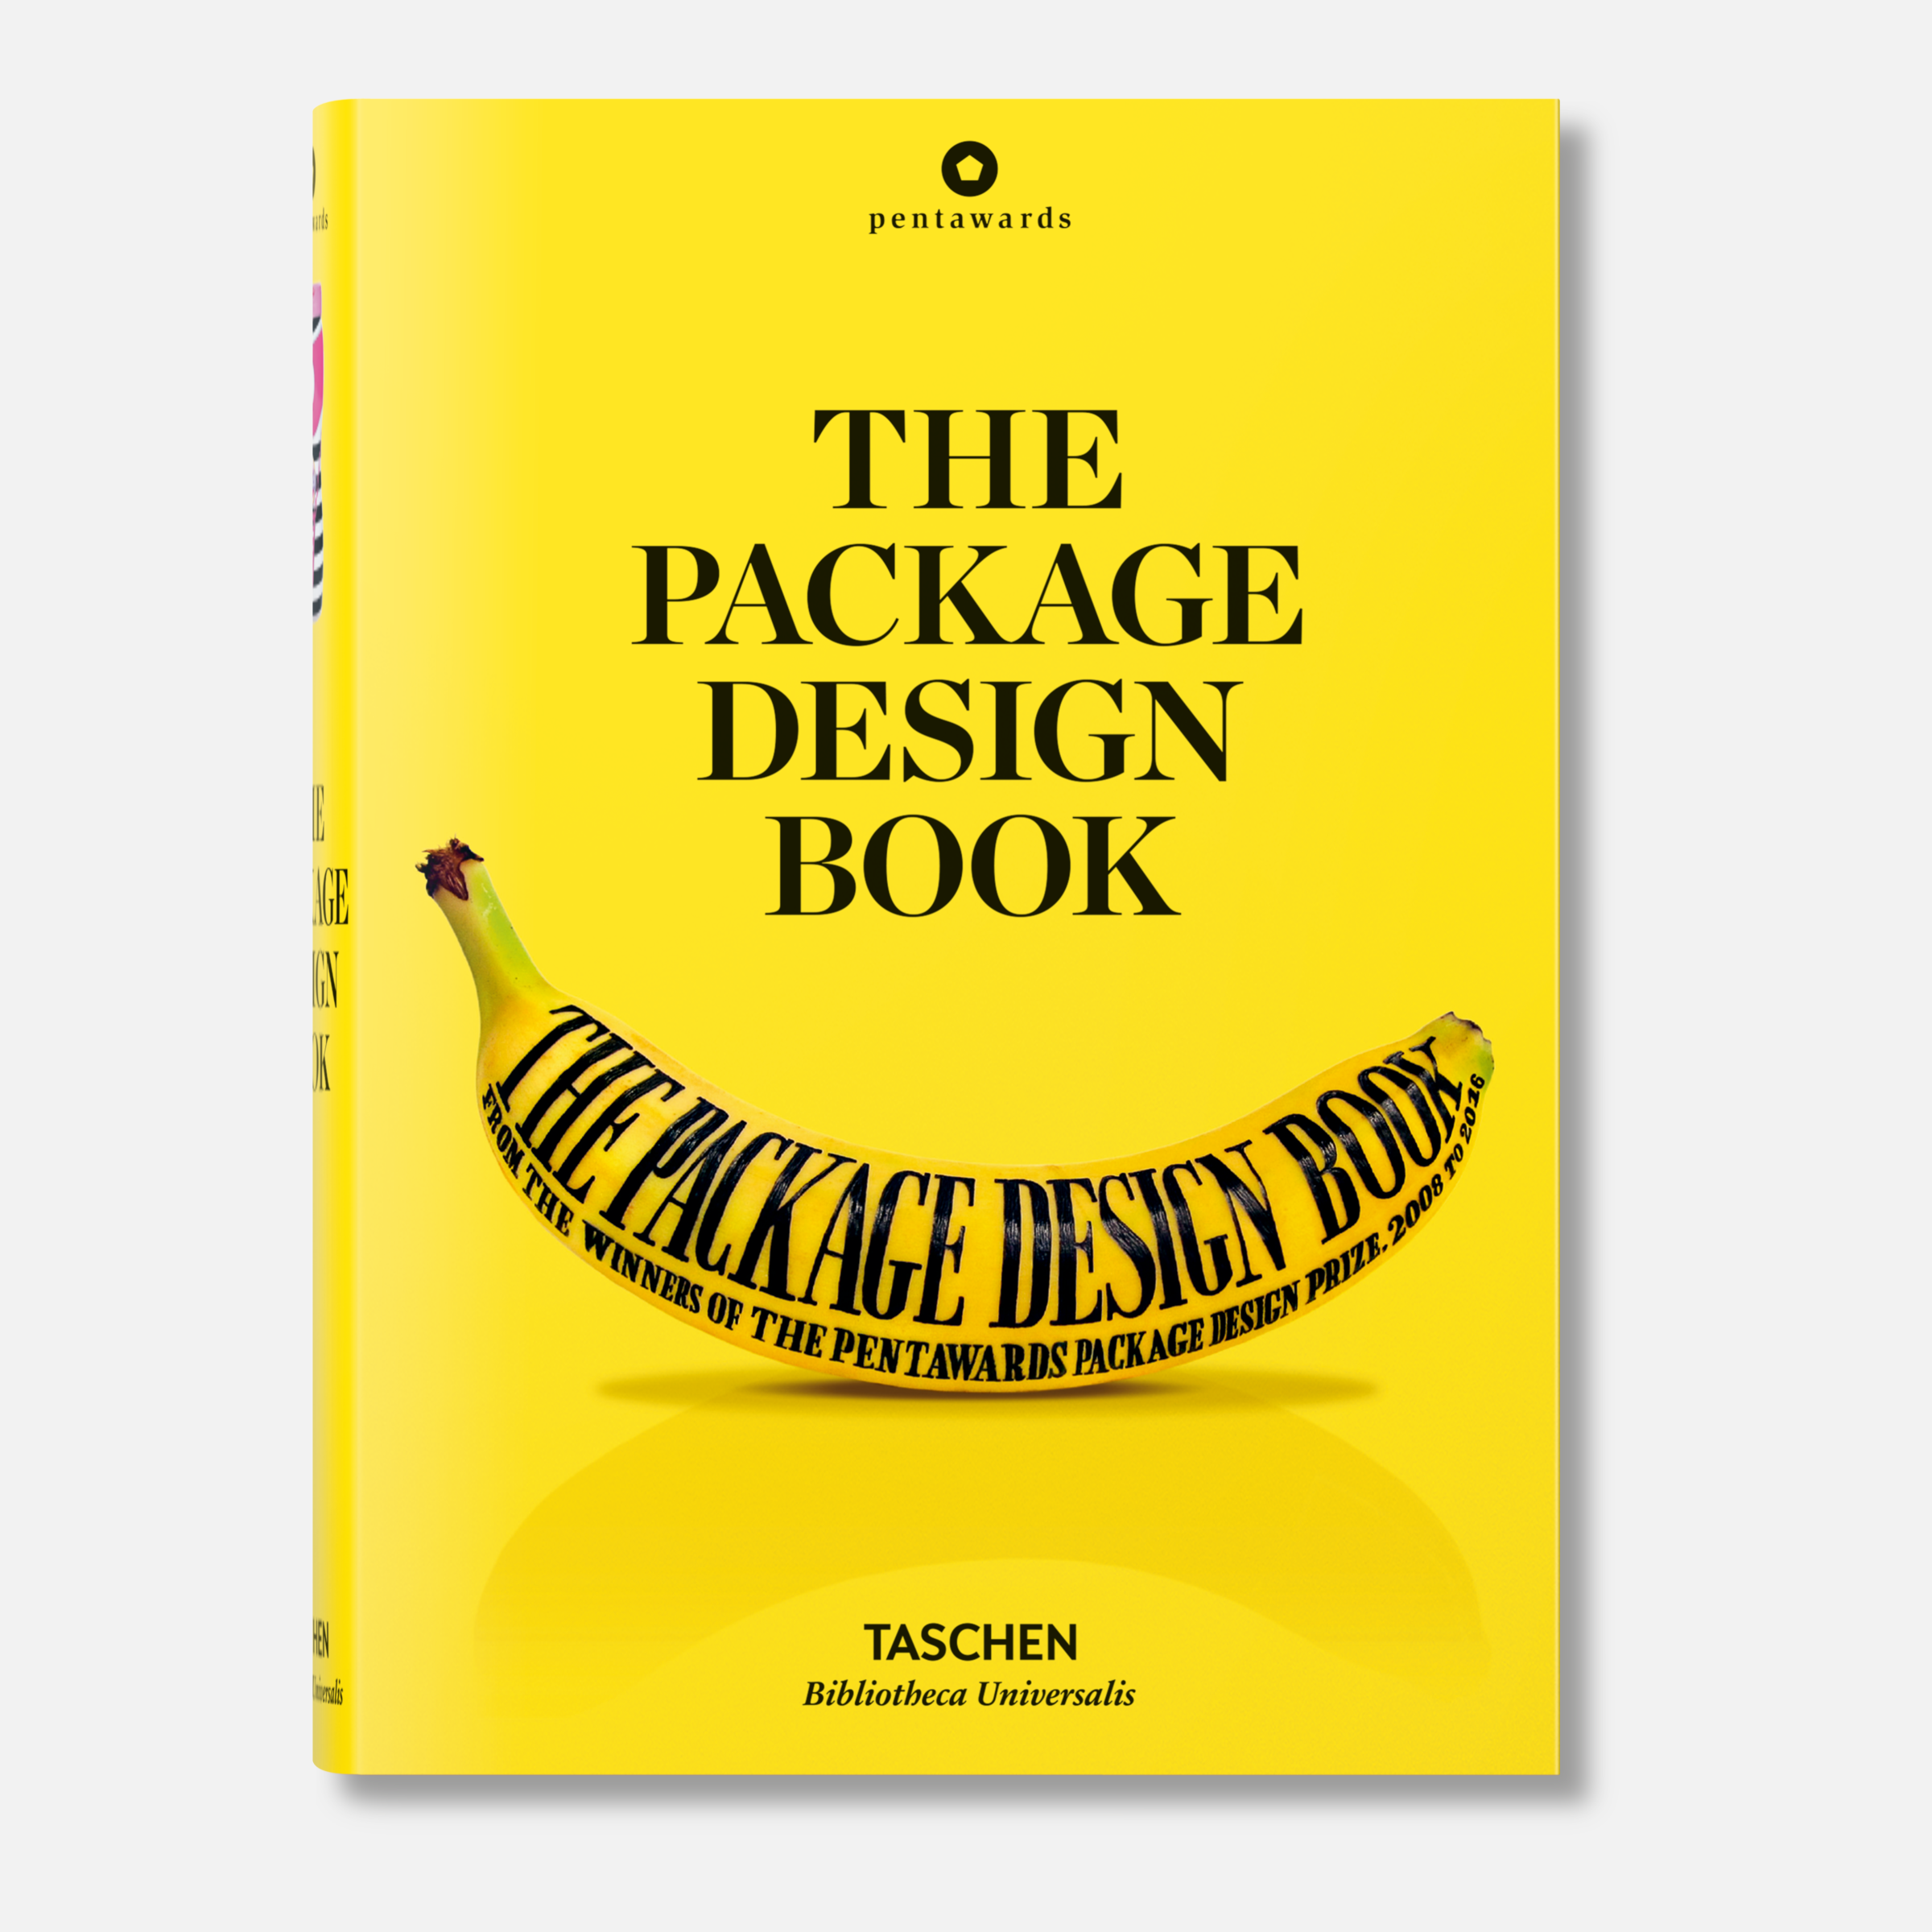 THE PACKAGE DESIGN BOOK